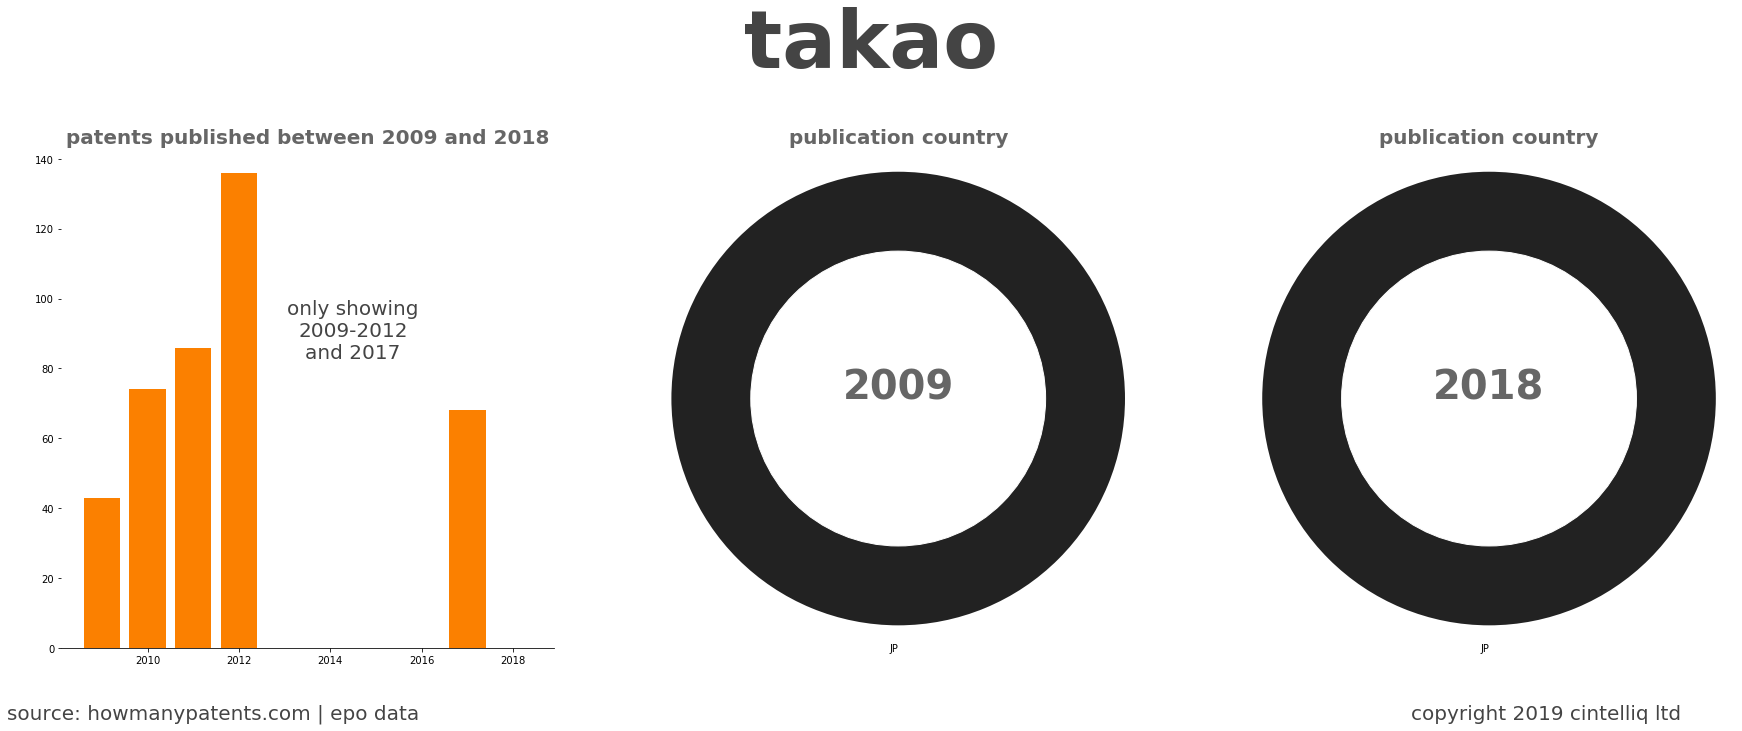 summary of patents for Takao